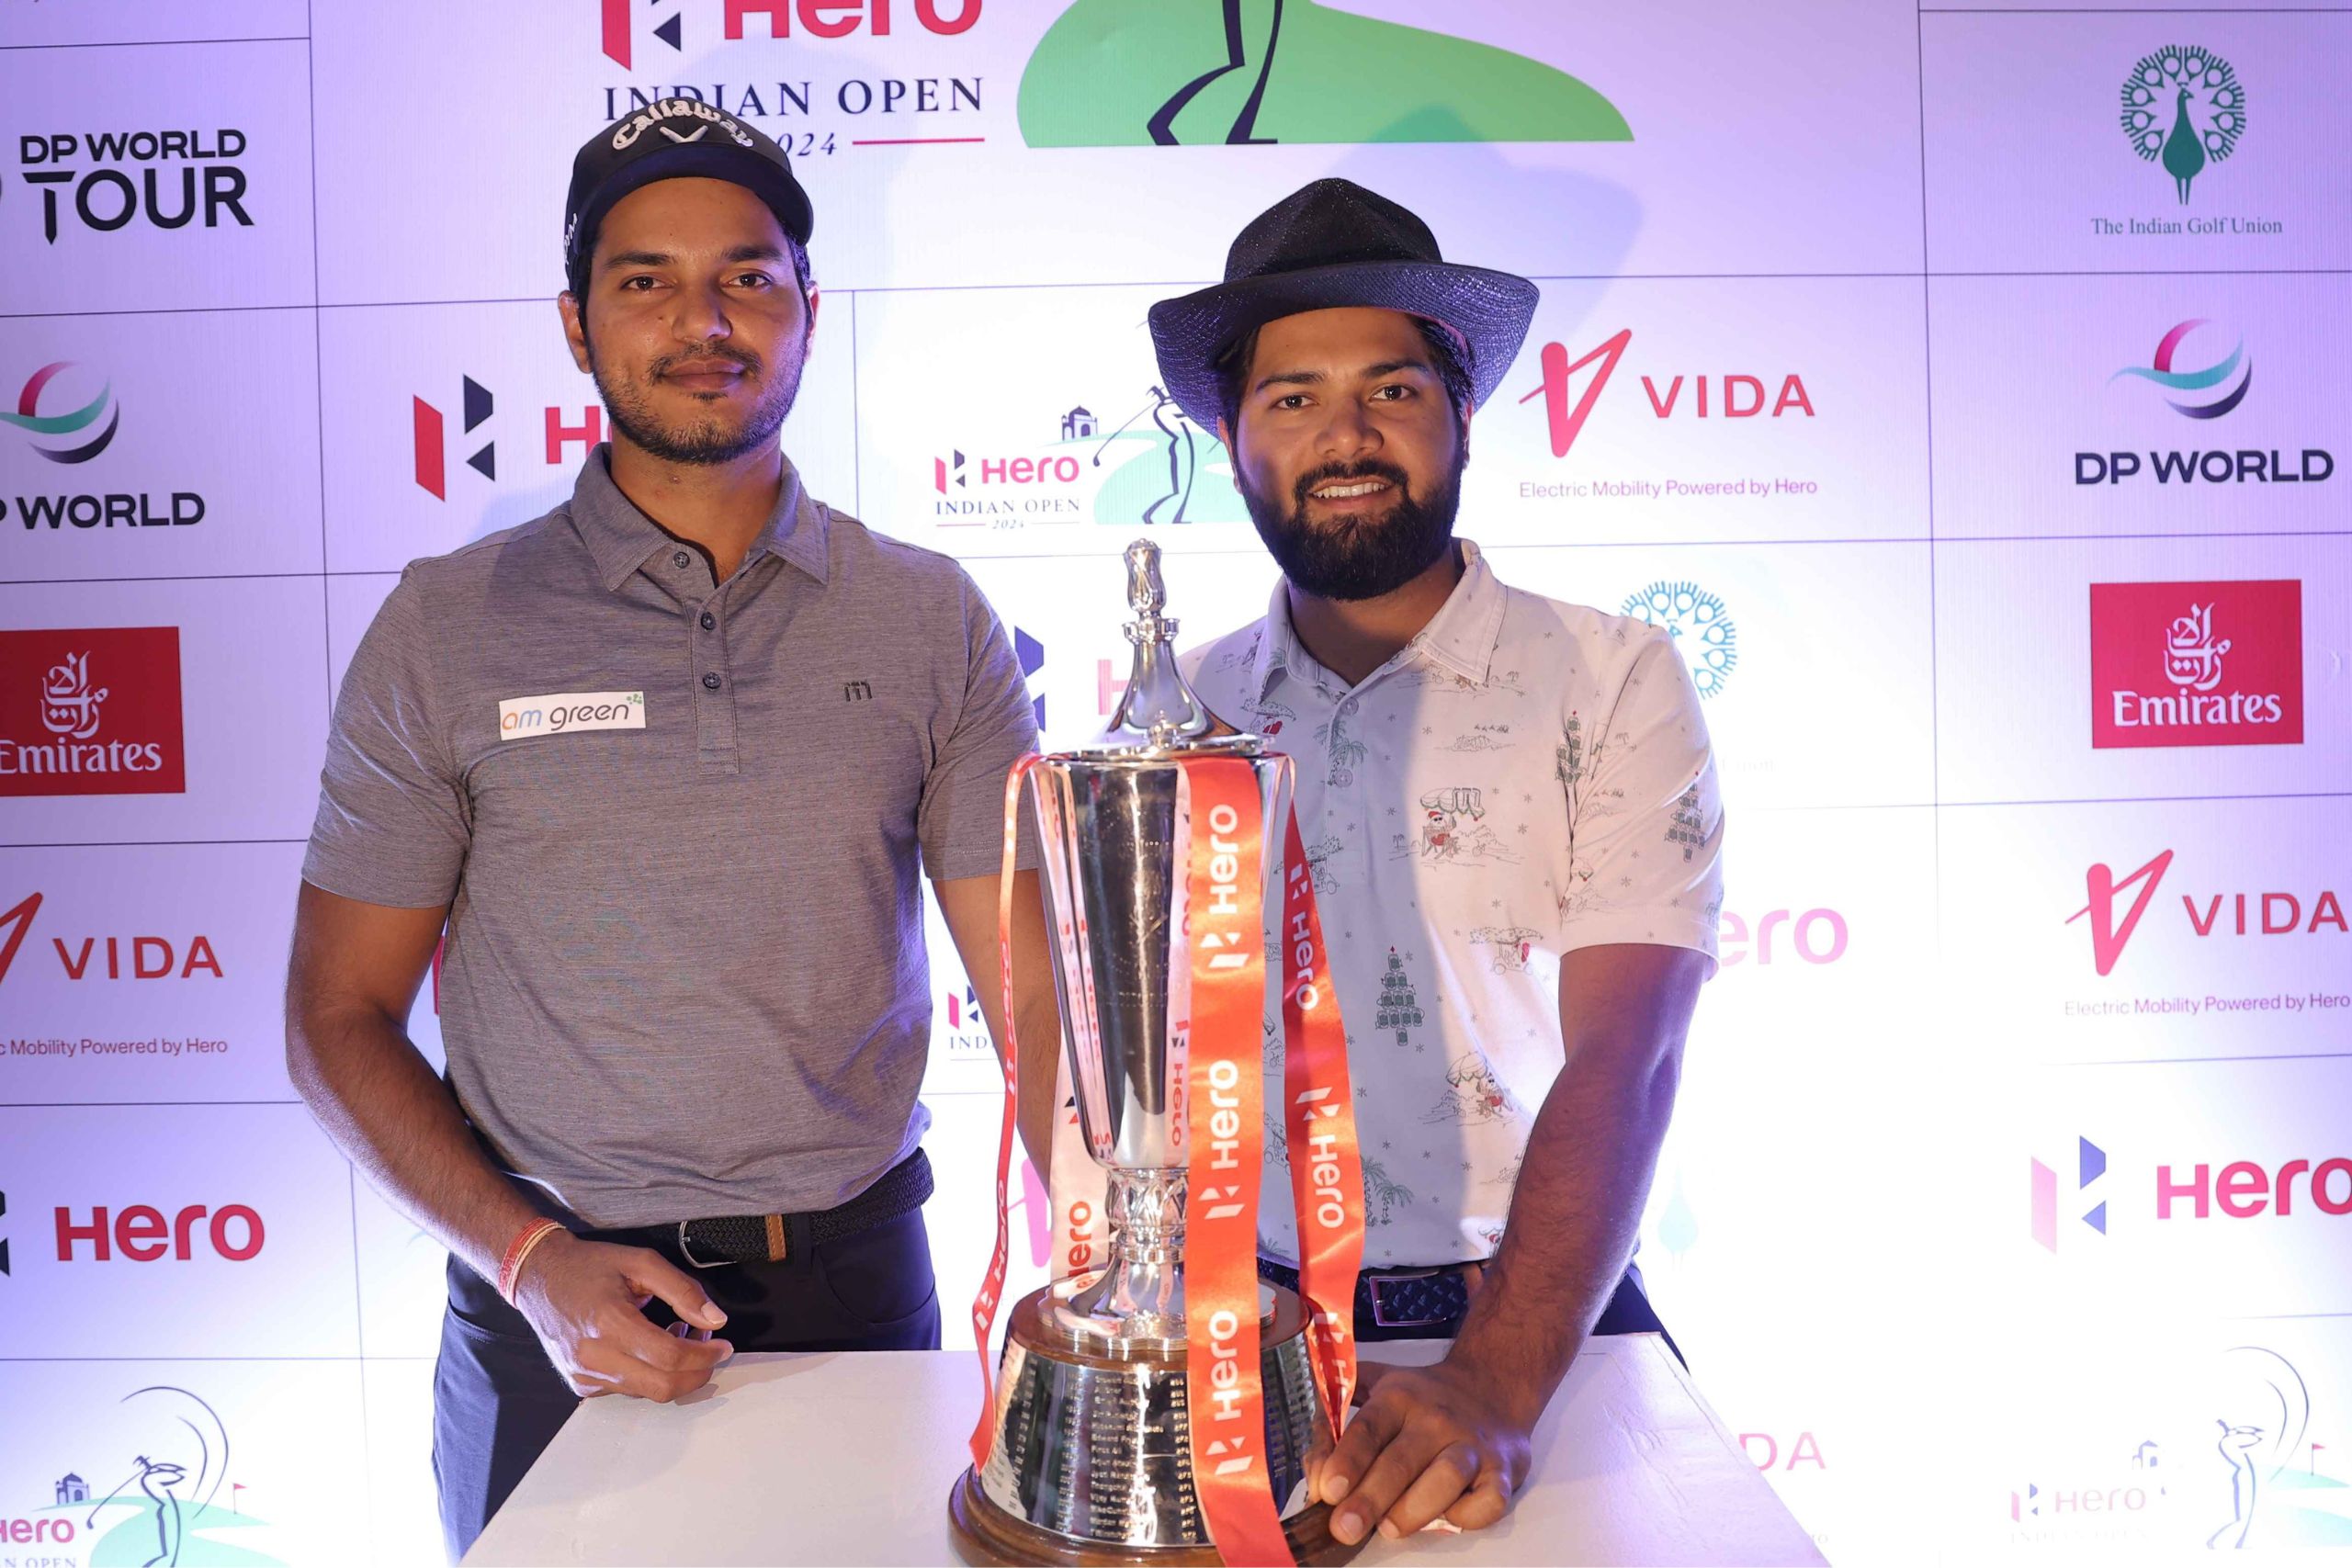 HERO INDIAN OPEN SET TO RETURN WITH A BIGGER PRIZE PURSE & MORE REWARDS